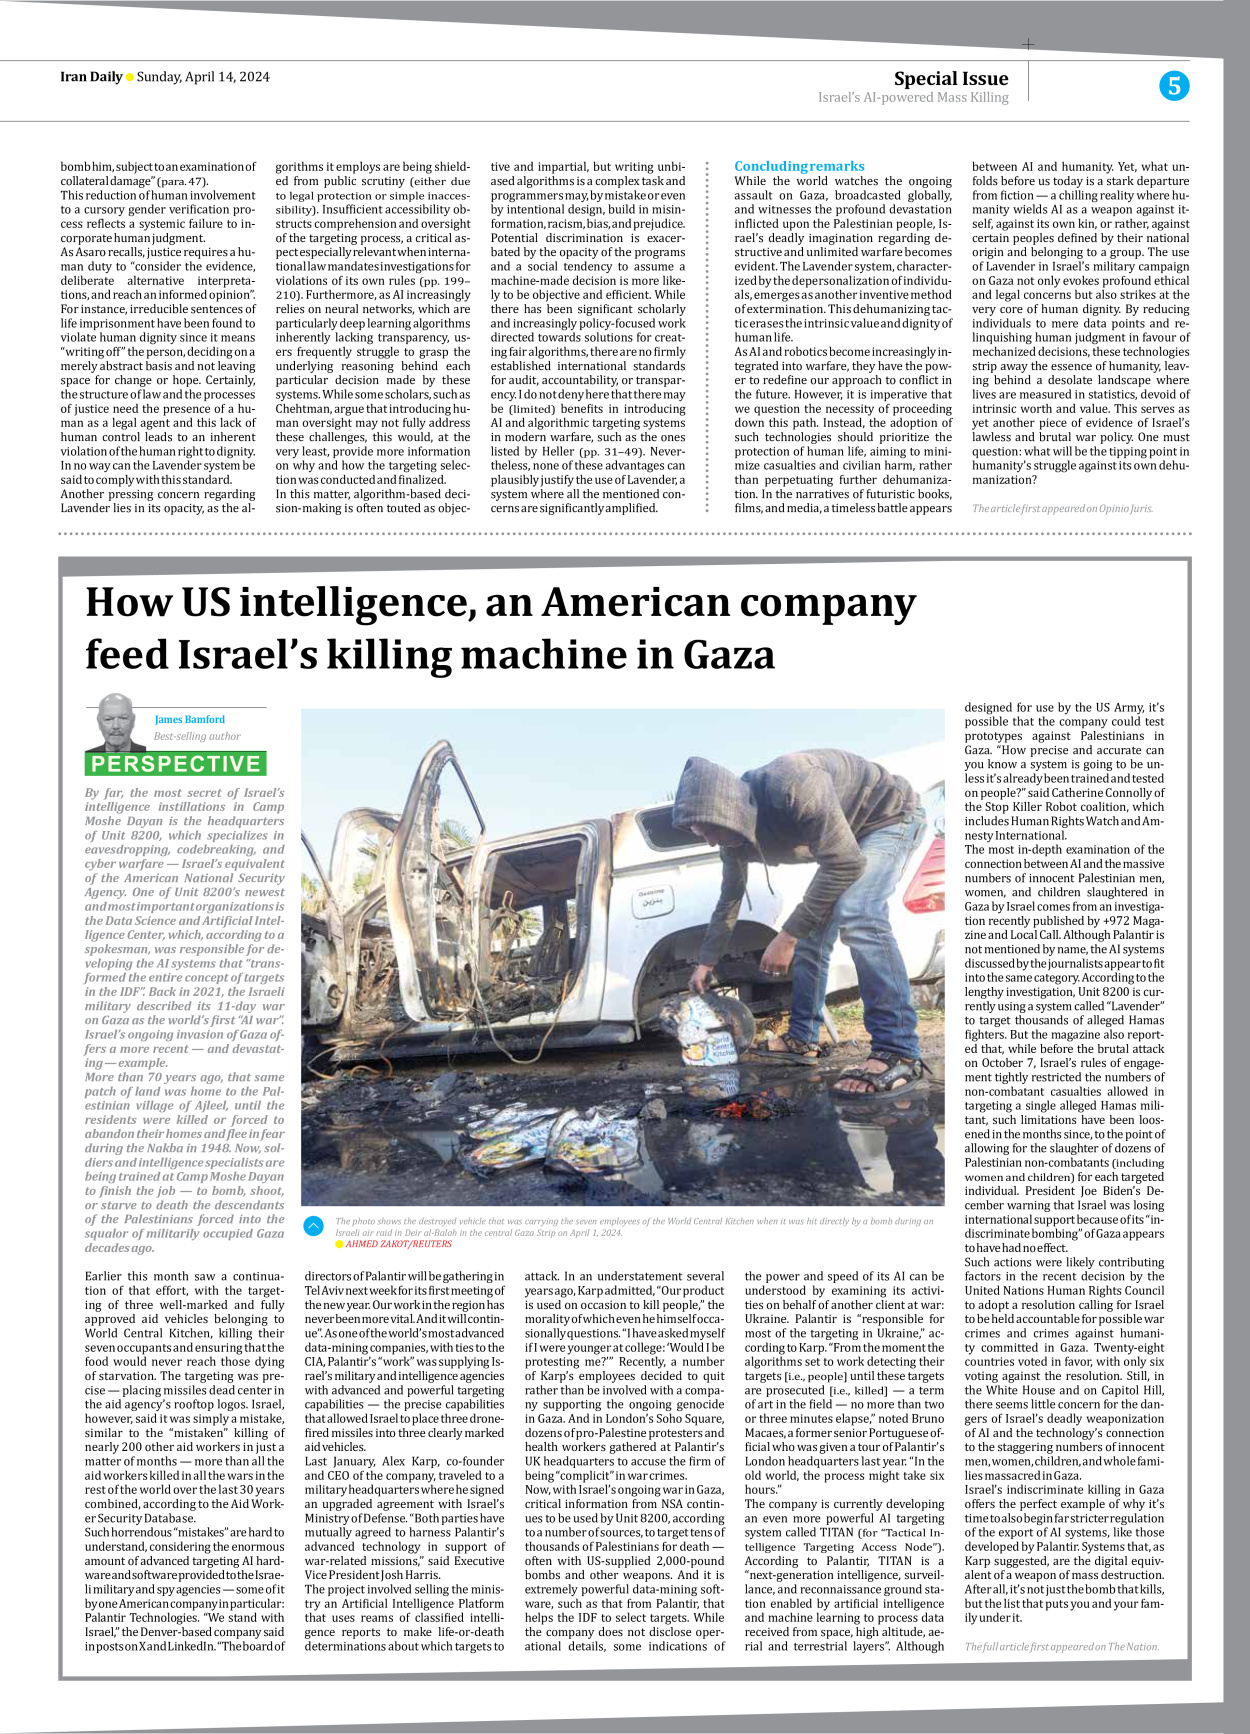 Iran Daily - Number Seven Thousand Five Hundred and Thirty Two - 14 April 2024 - Page 5